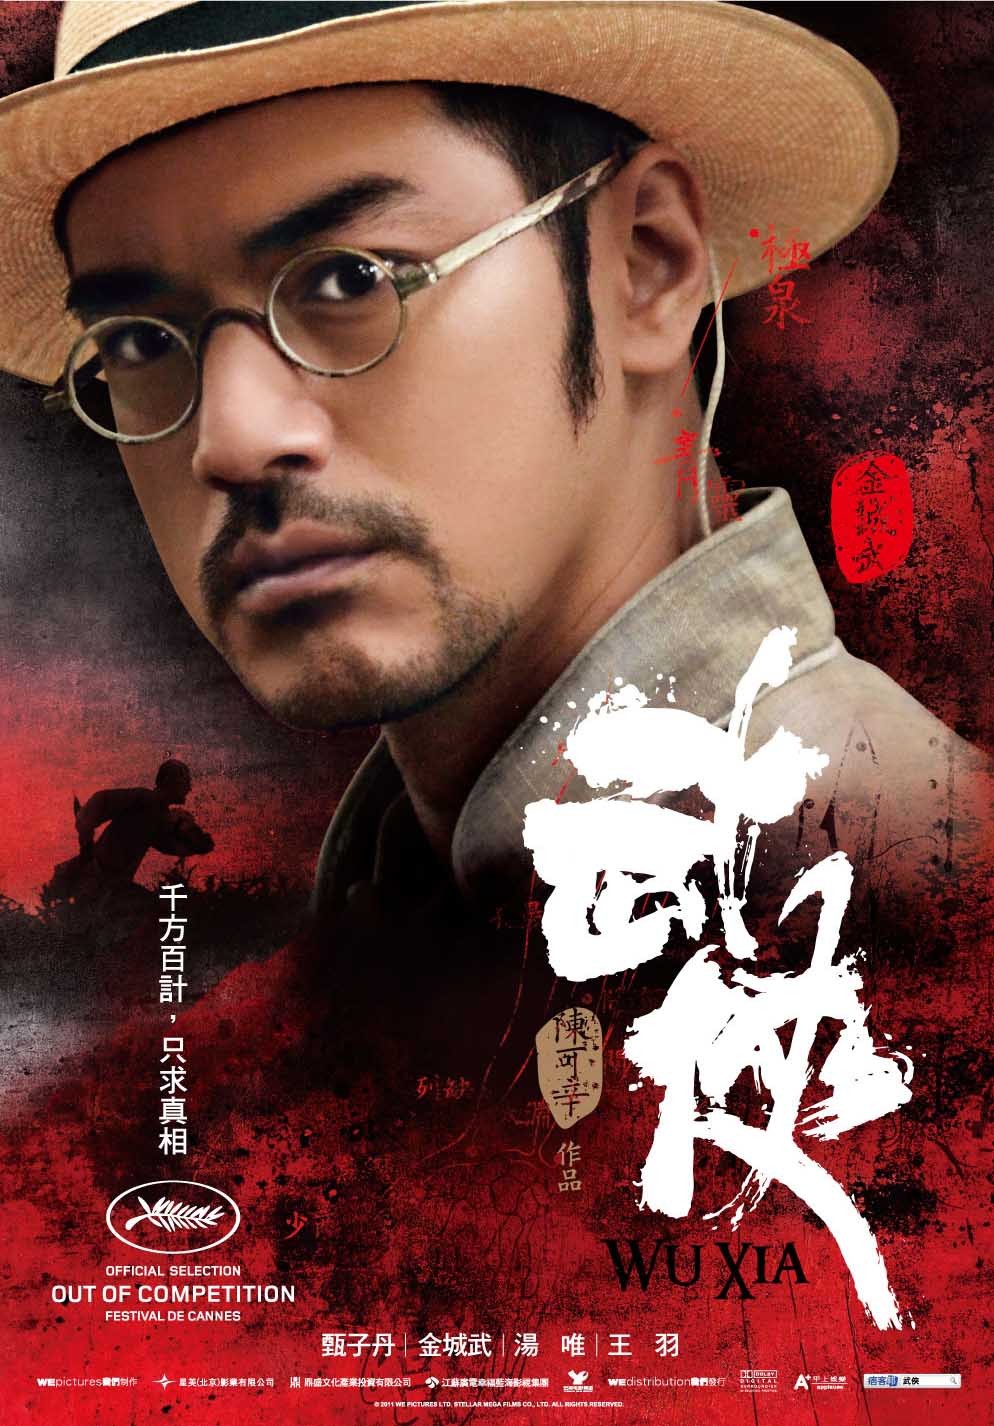 Extra Large Movie Poster Image for Wu xia (#2 of 4)